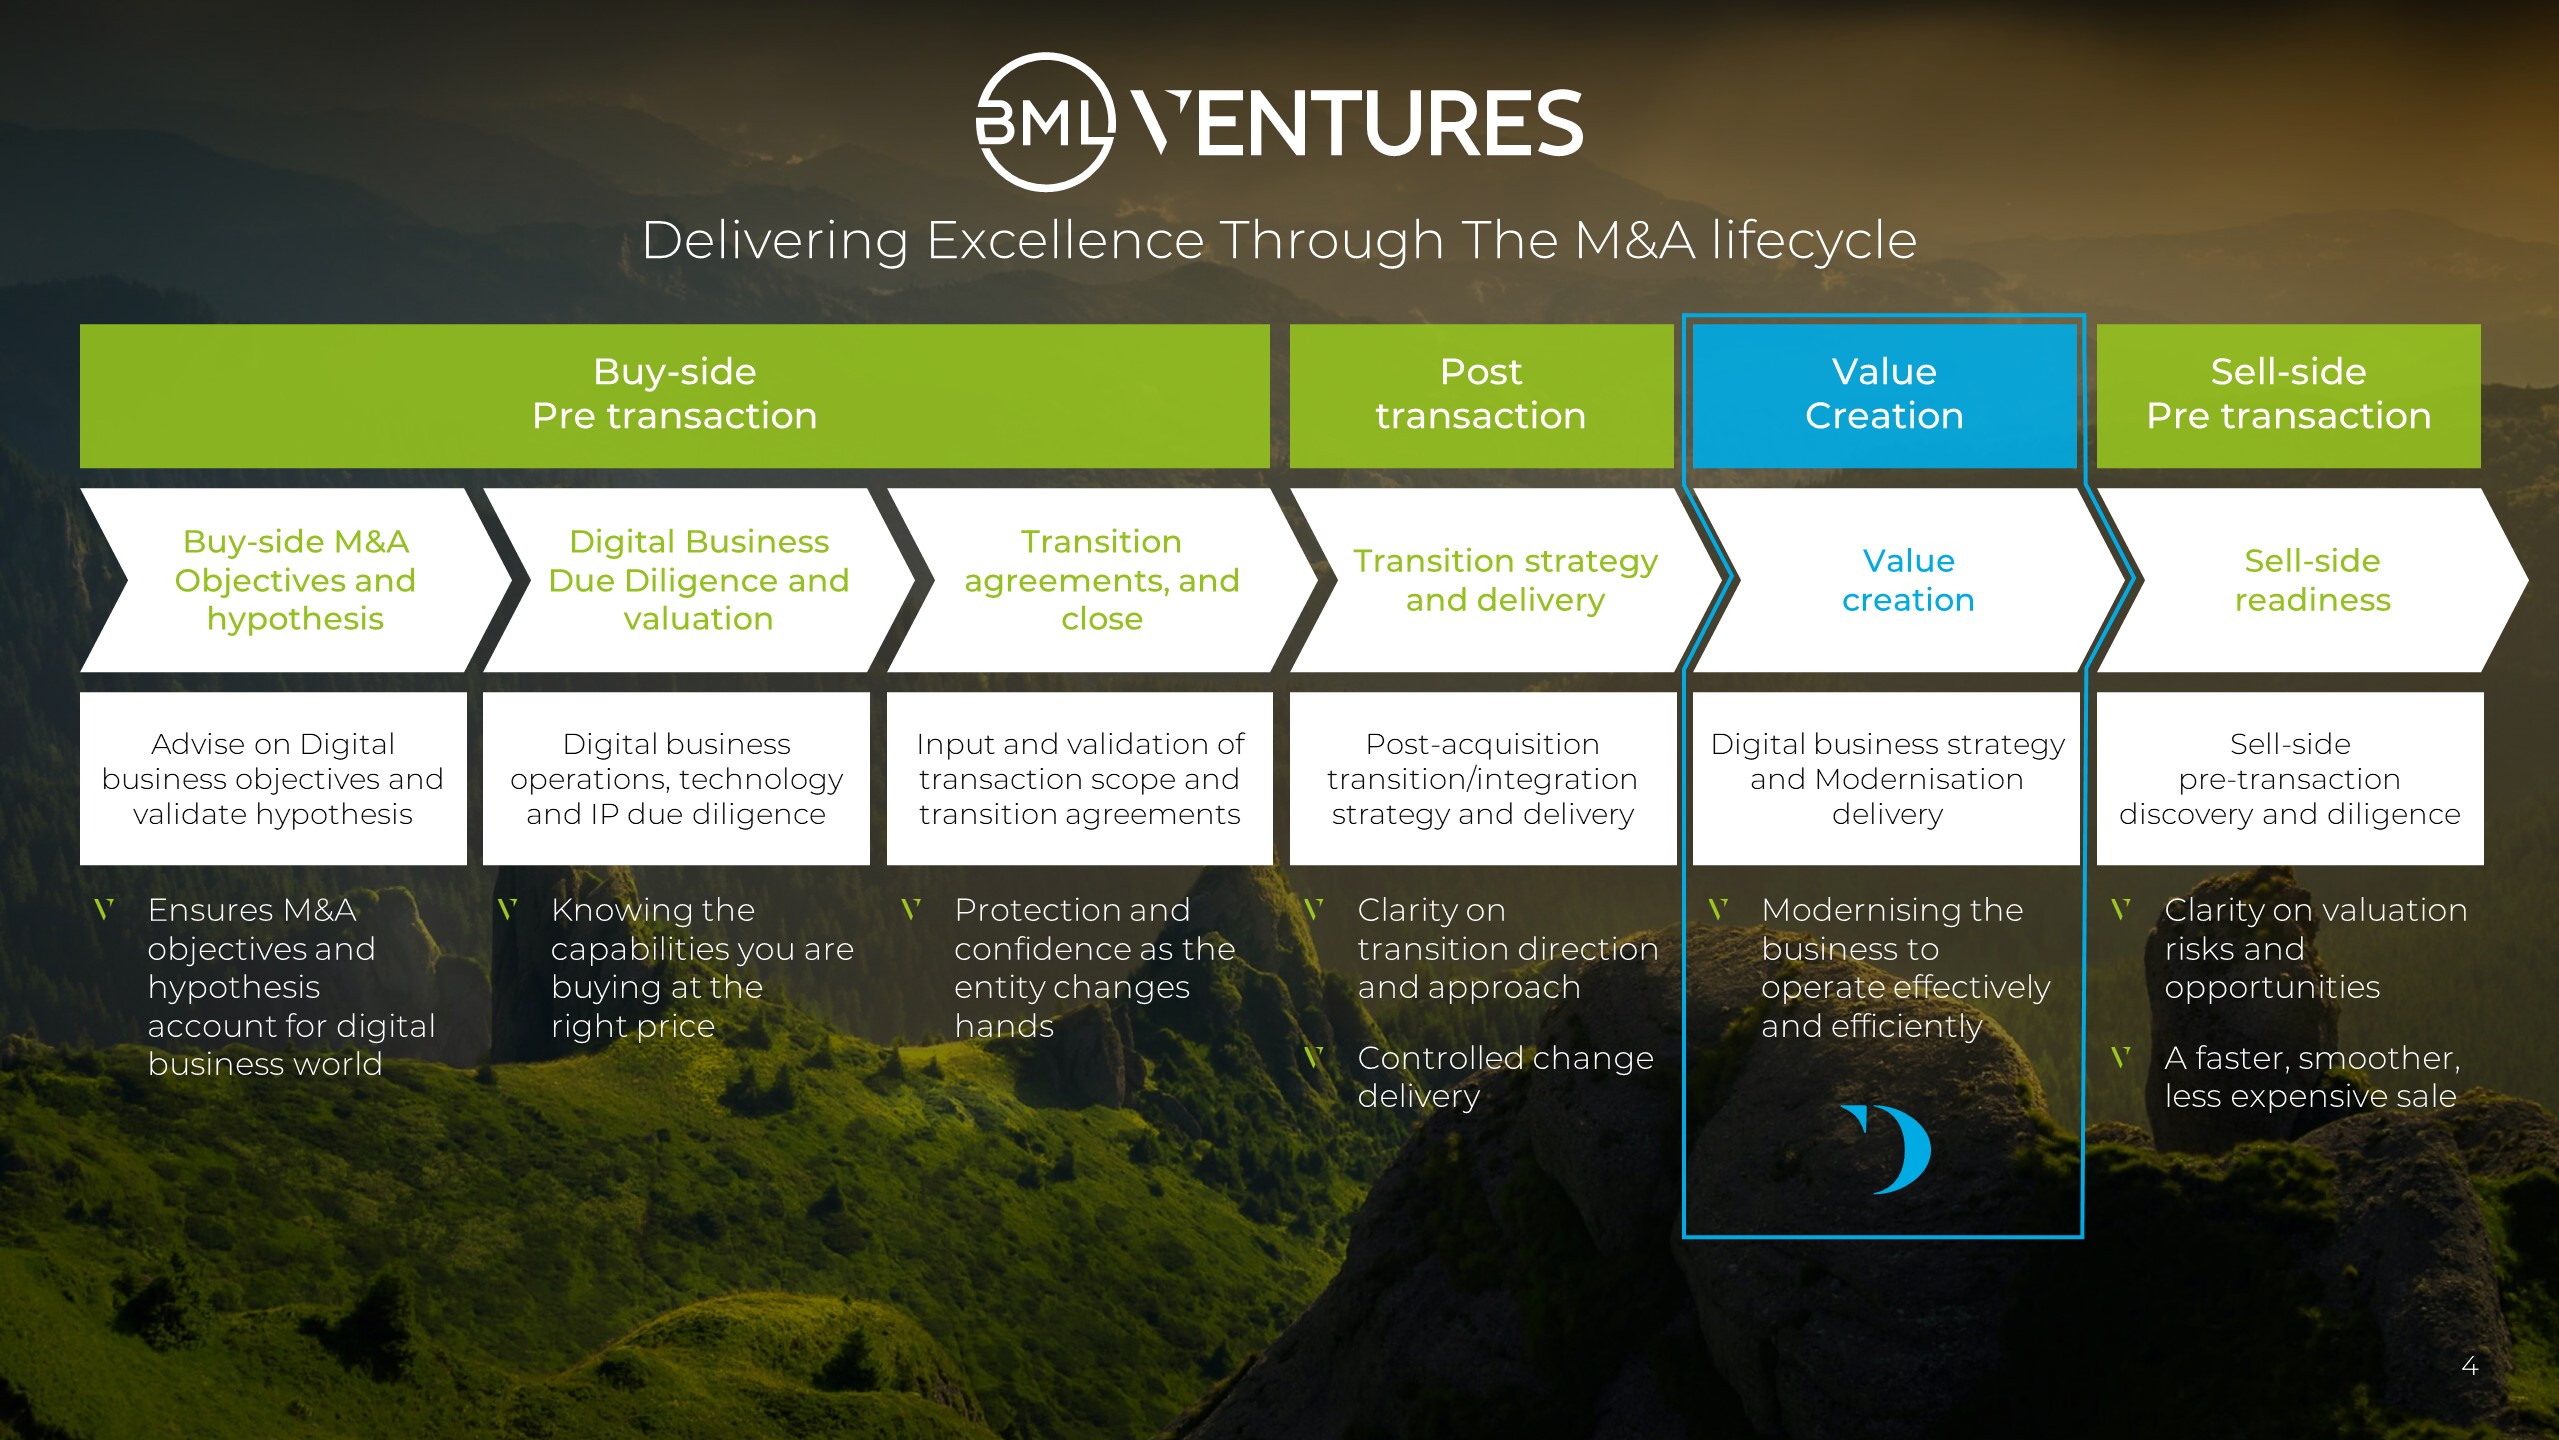 230906 bml ventures m & a lifecycle graphic